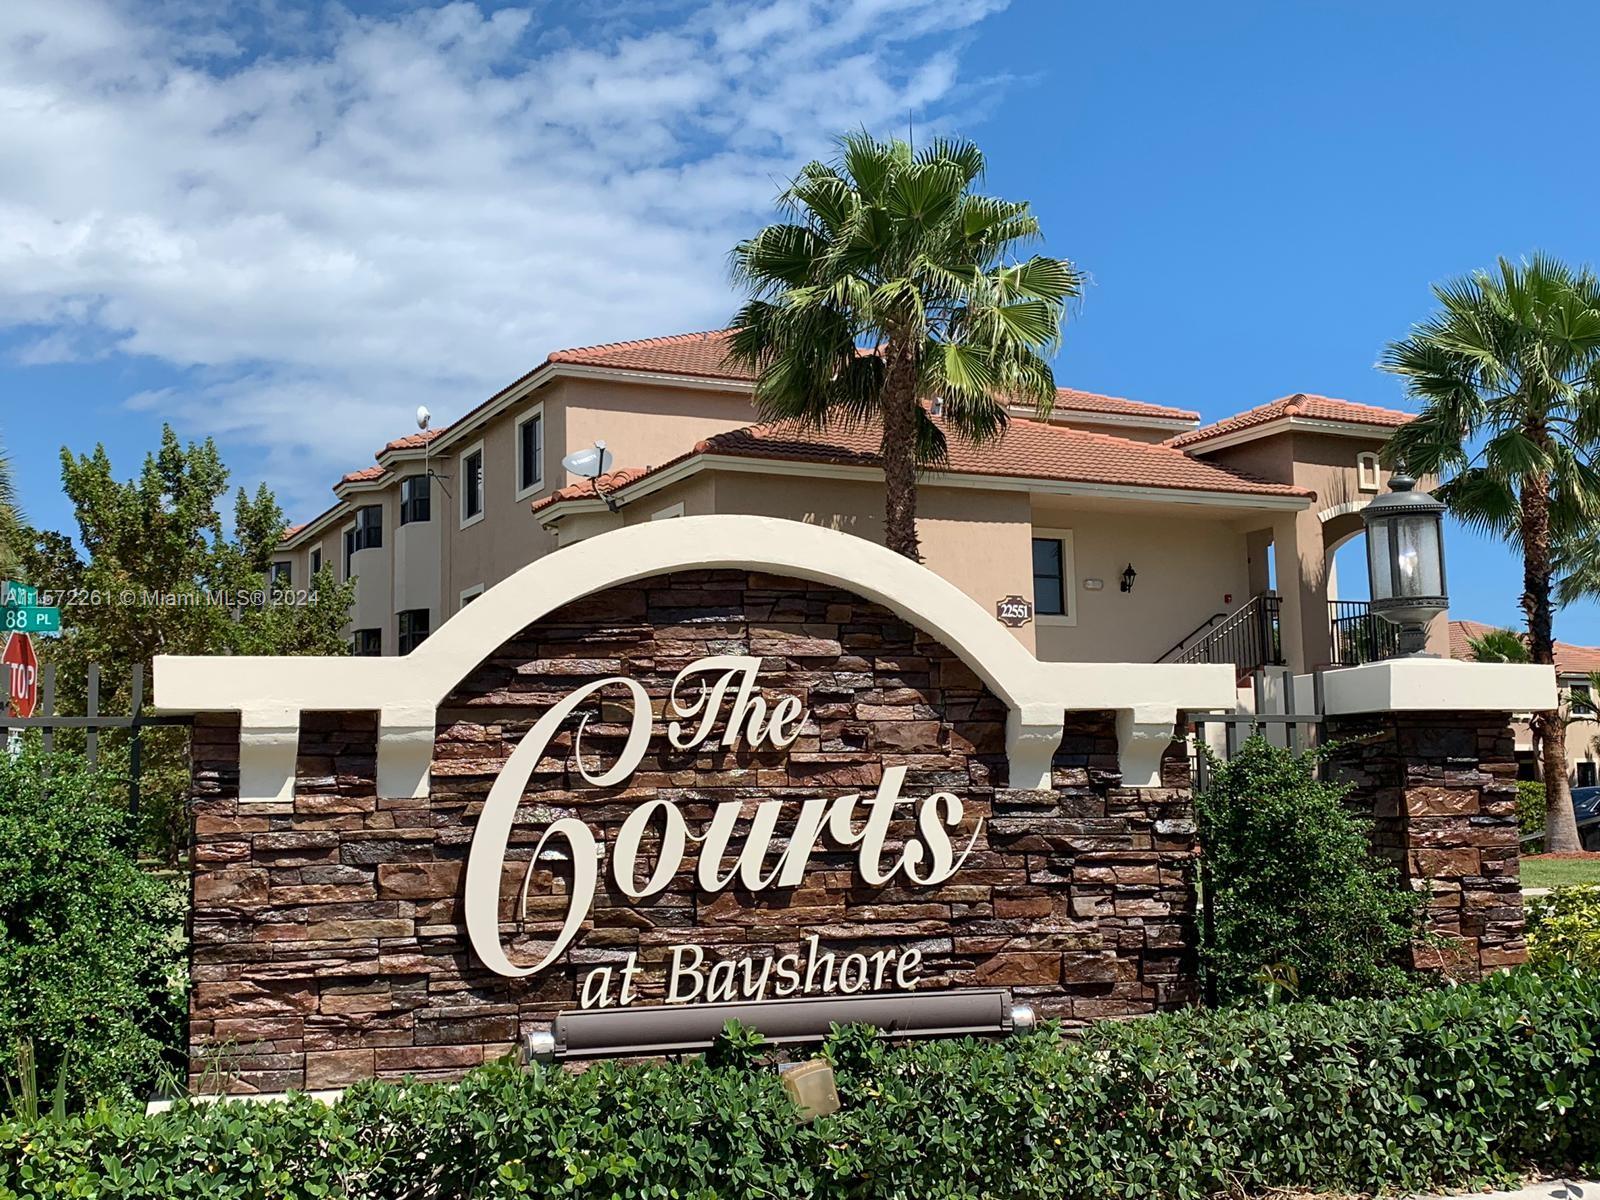 Come and see this nice apartment located in the spectacular community Isles at Bayshore with a beautiful Club house, community pool, GYM, Playground, Gated with 3 Bedrooms 2 bathrooms. Appliances included: Washer/Dryer, Refrigerator, microwave.